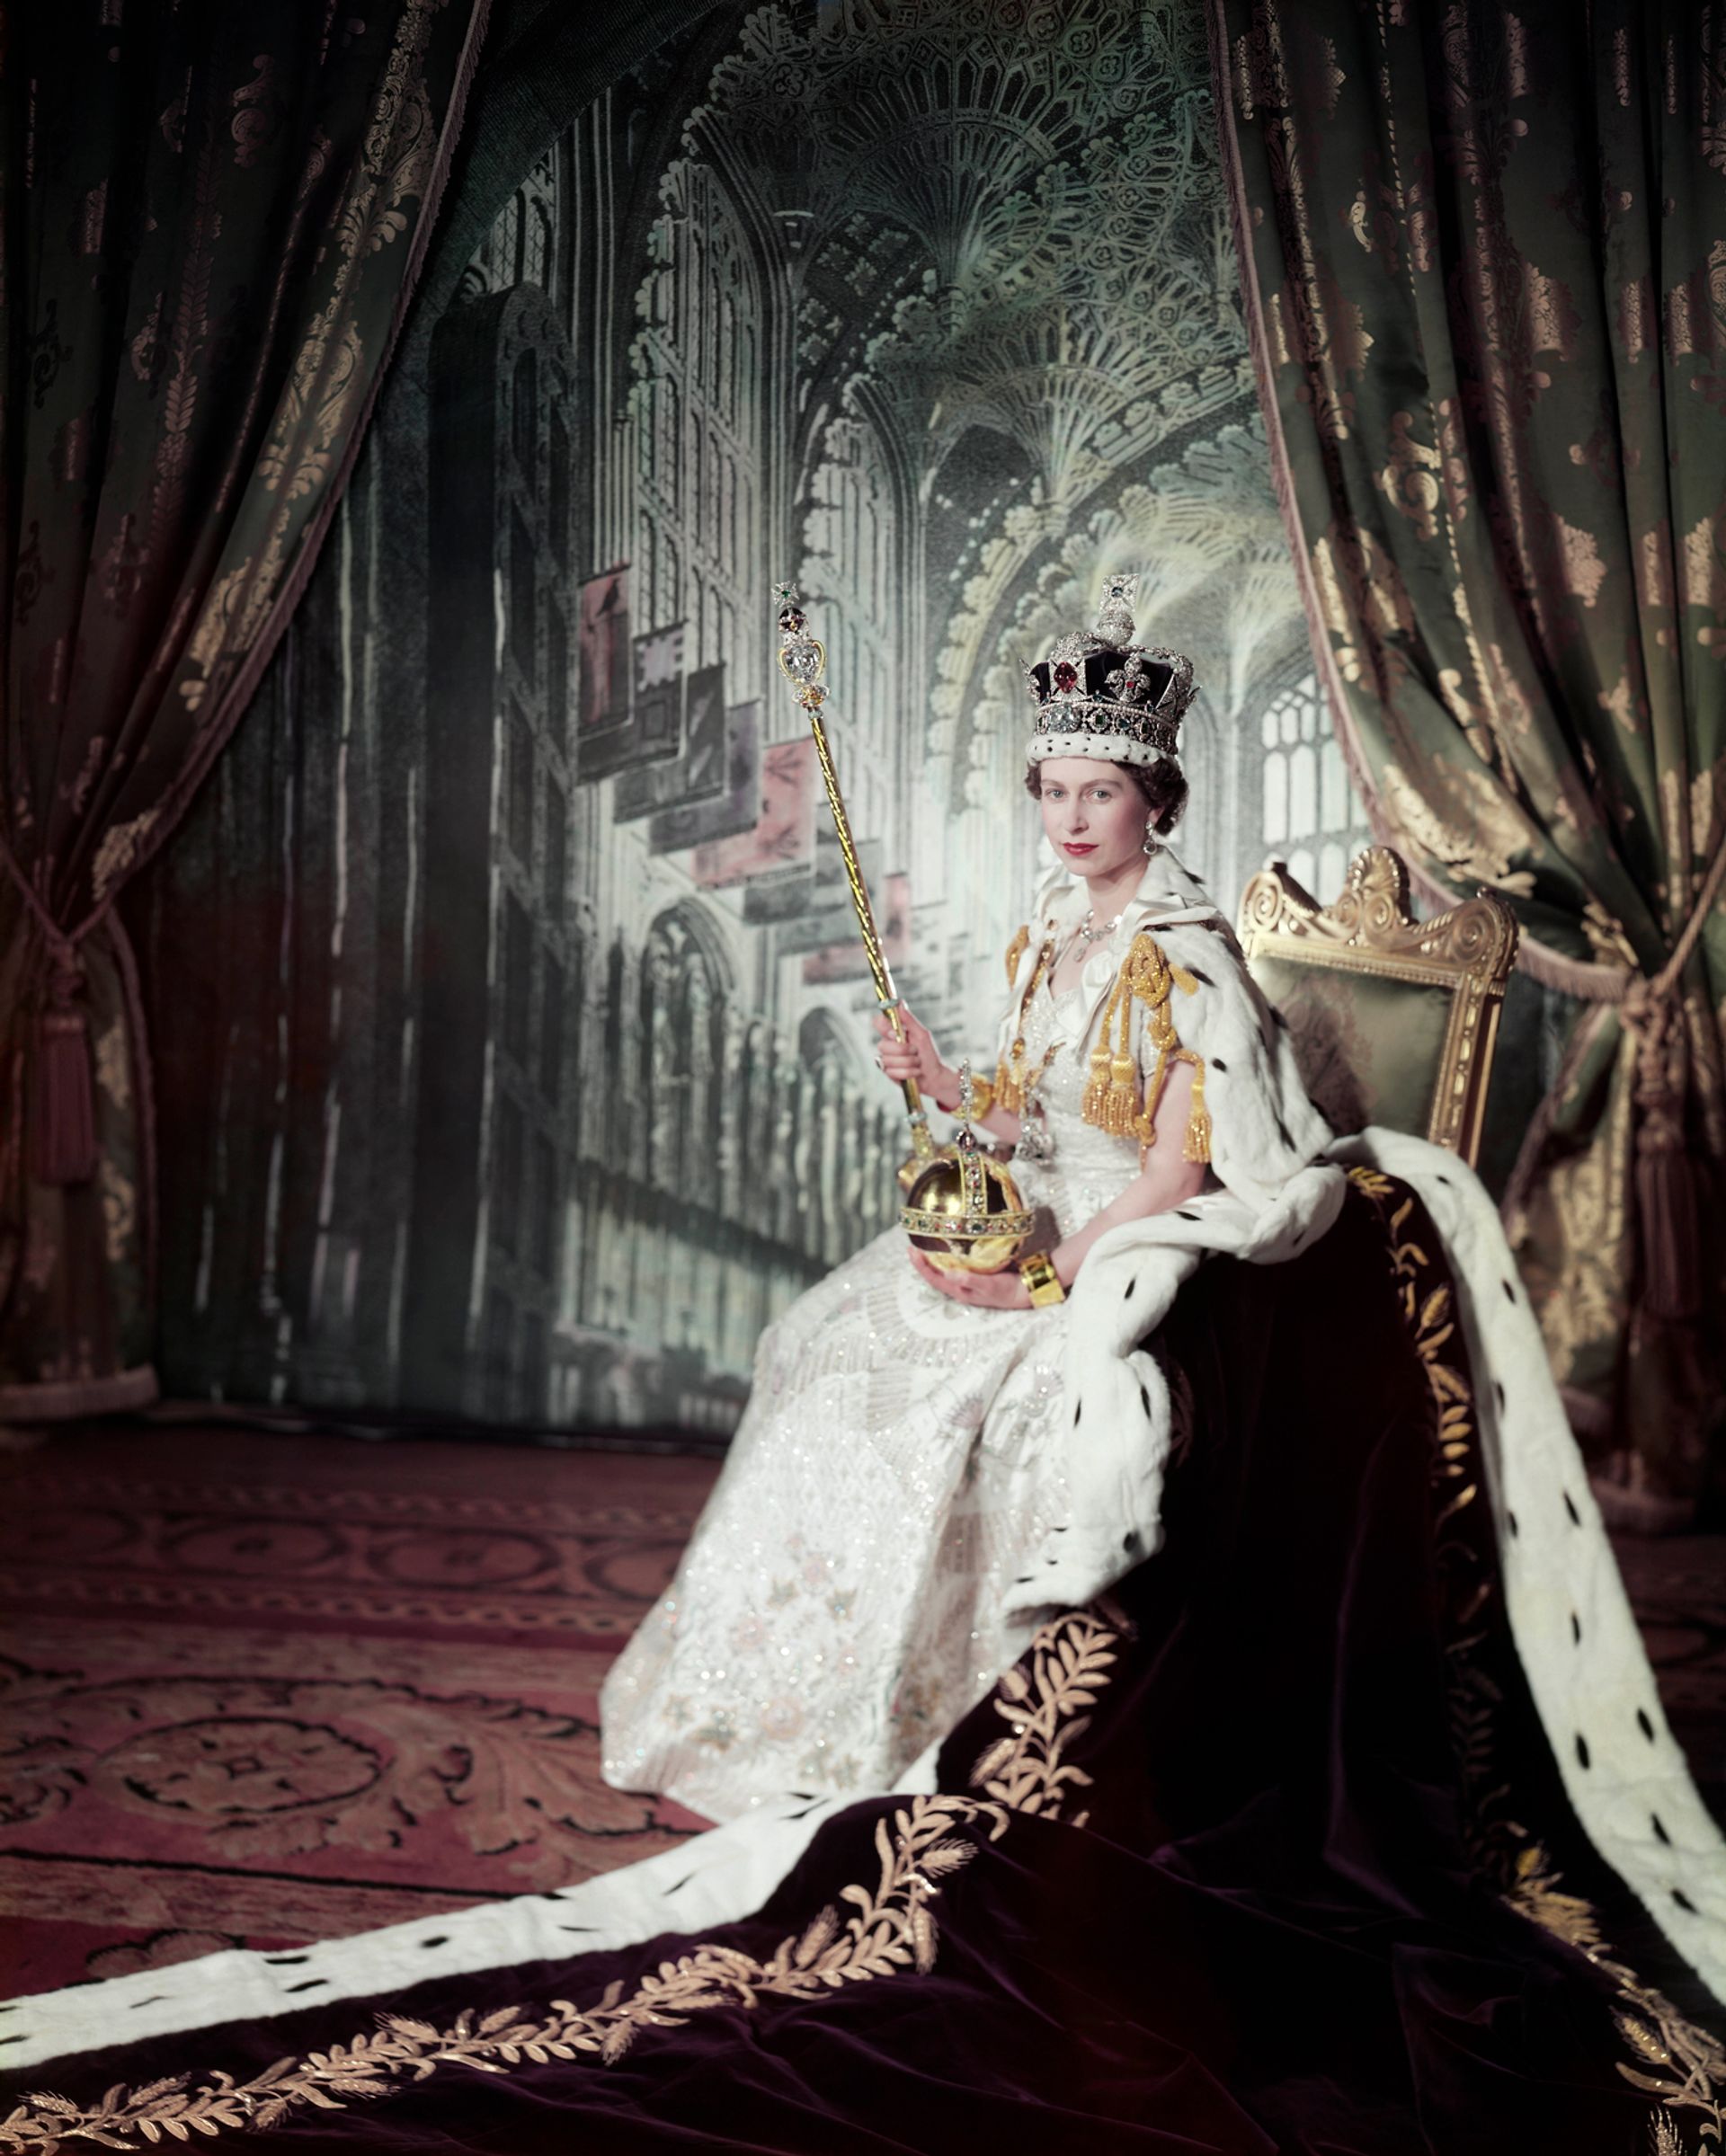 Cecil Beaton: Queen Elizabeth II on her Coronation Day (1953) Royal Collection Trust/© Her Majesty Queen Elizabeth II 2021